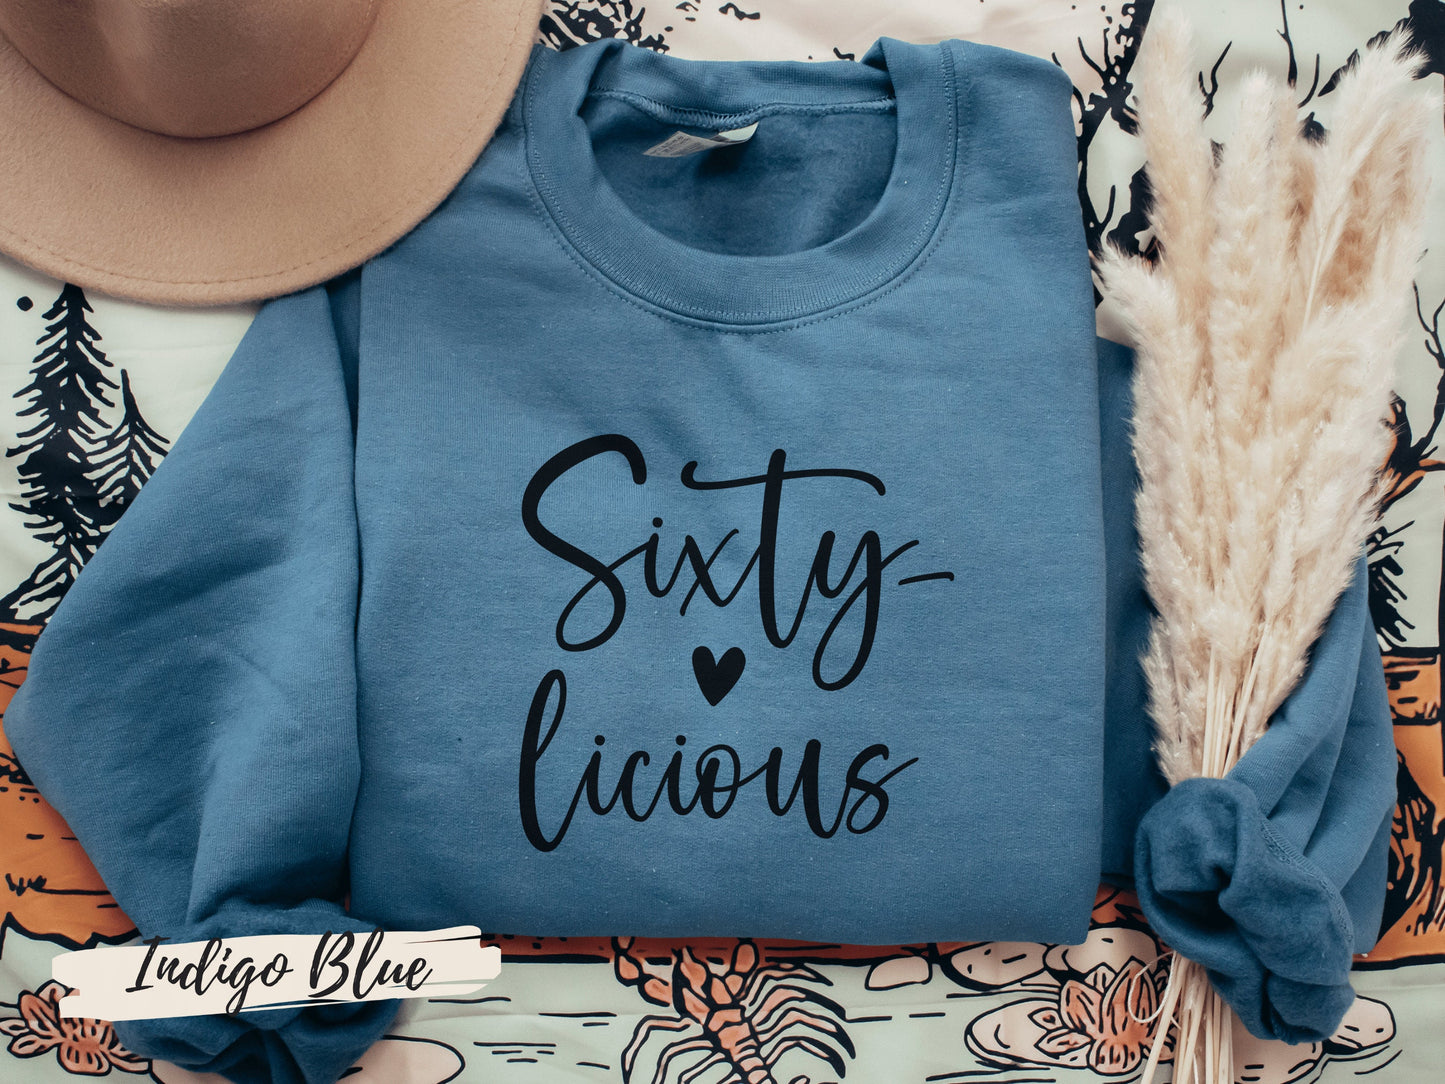 Sixty licious Sweatshirt, 60th Birthday Gifts for Women, 60th Birthday Shirt, 60th Birthday Gifts, 60th Birthday Women, 60th Birthday Friend